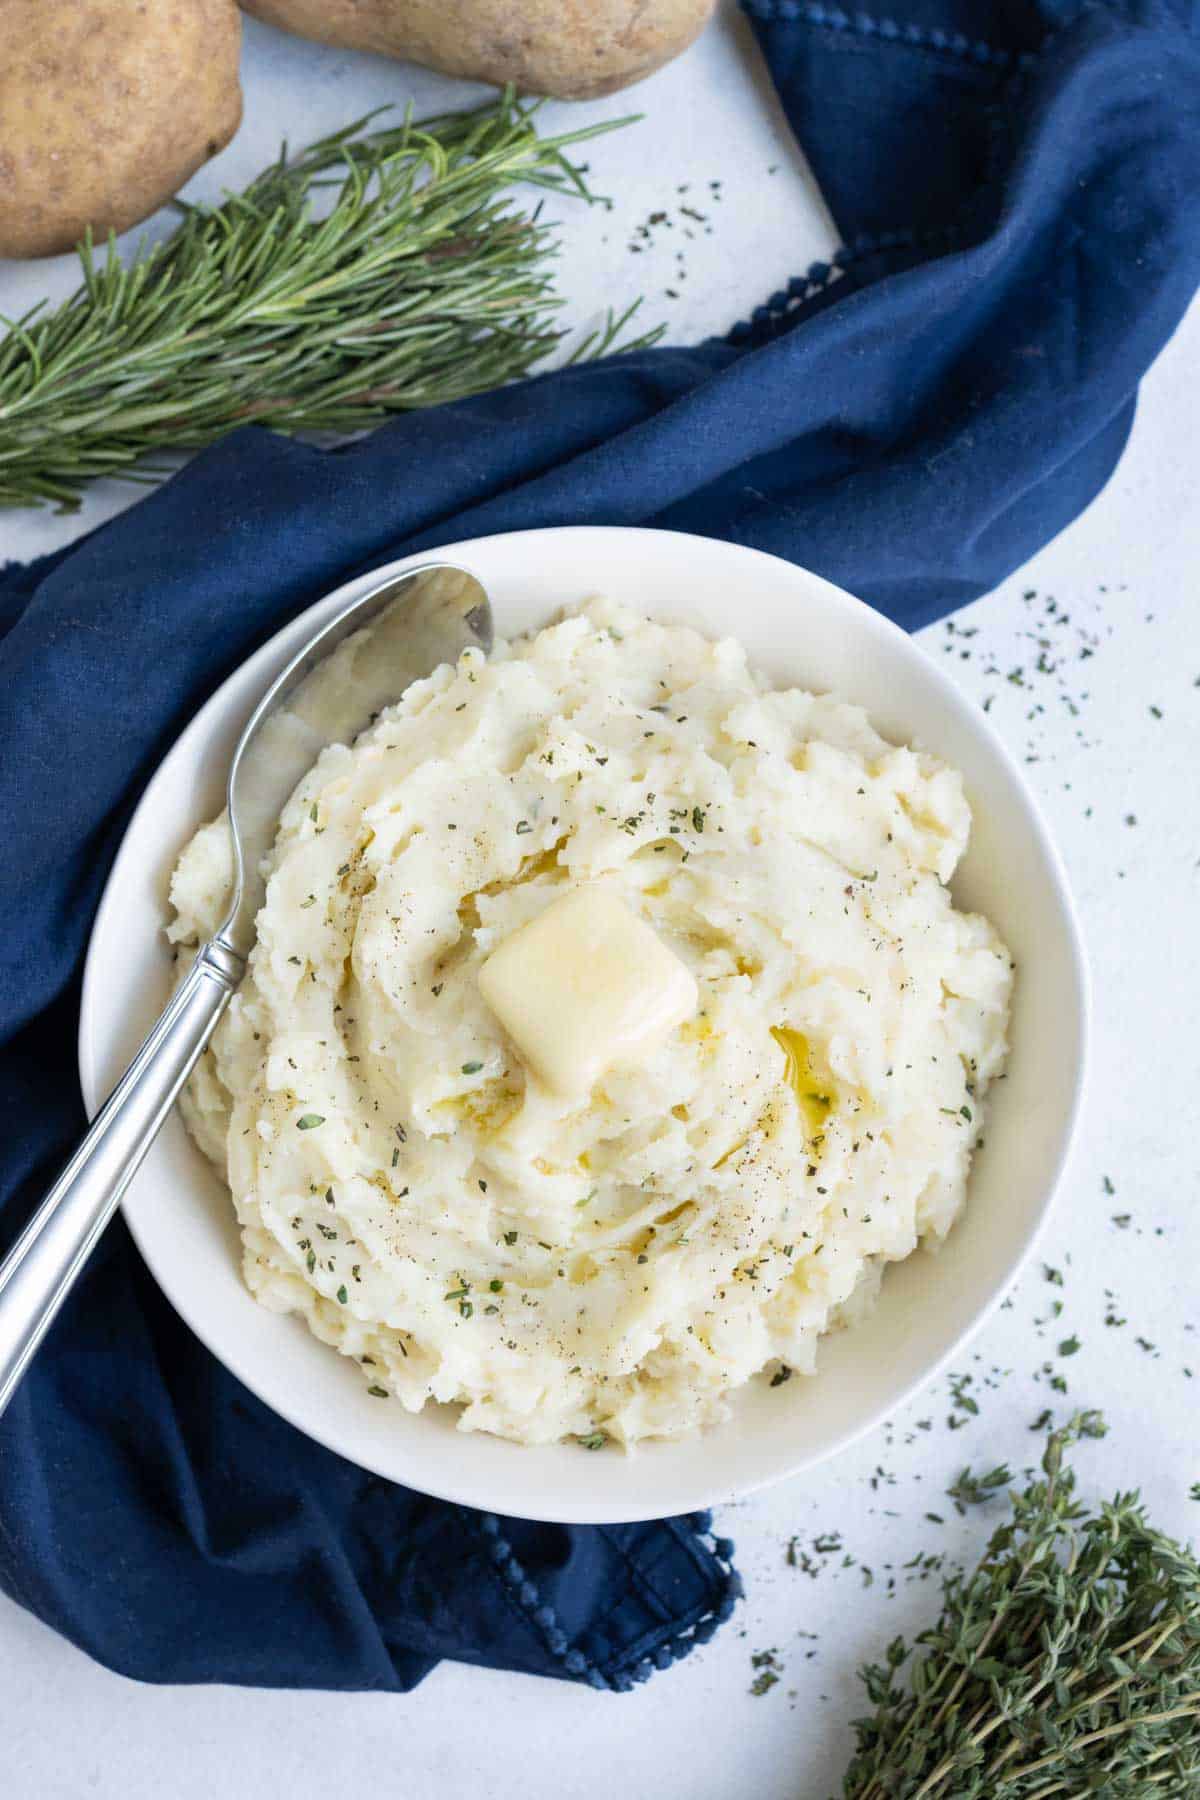 Top mashed potatoes with fresh butter and herbs.